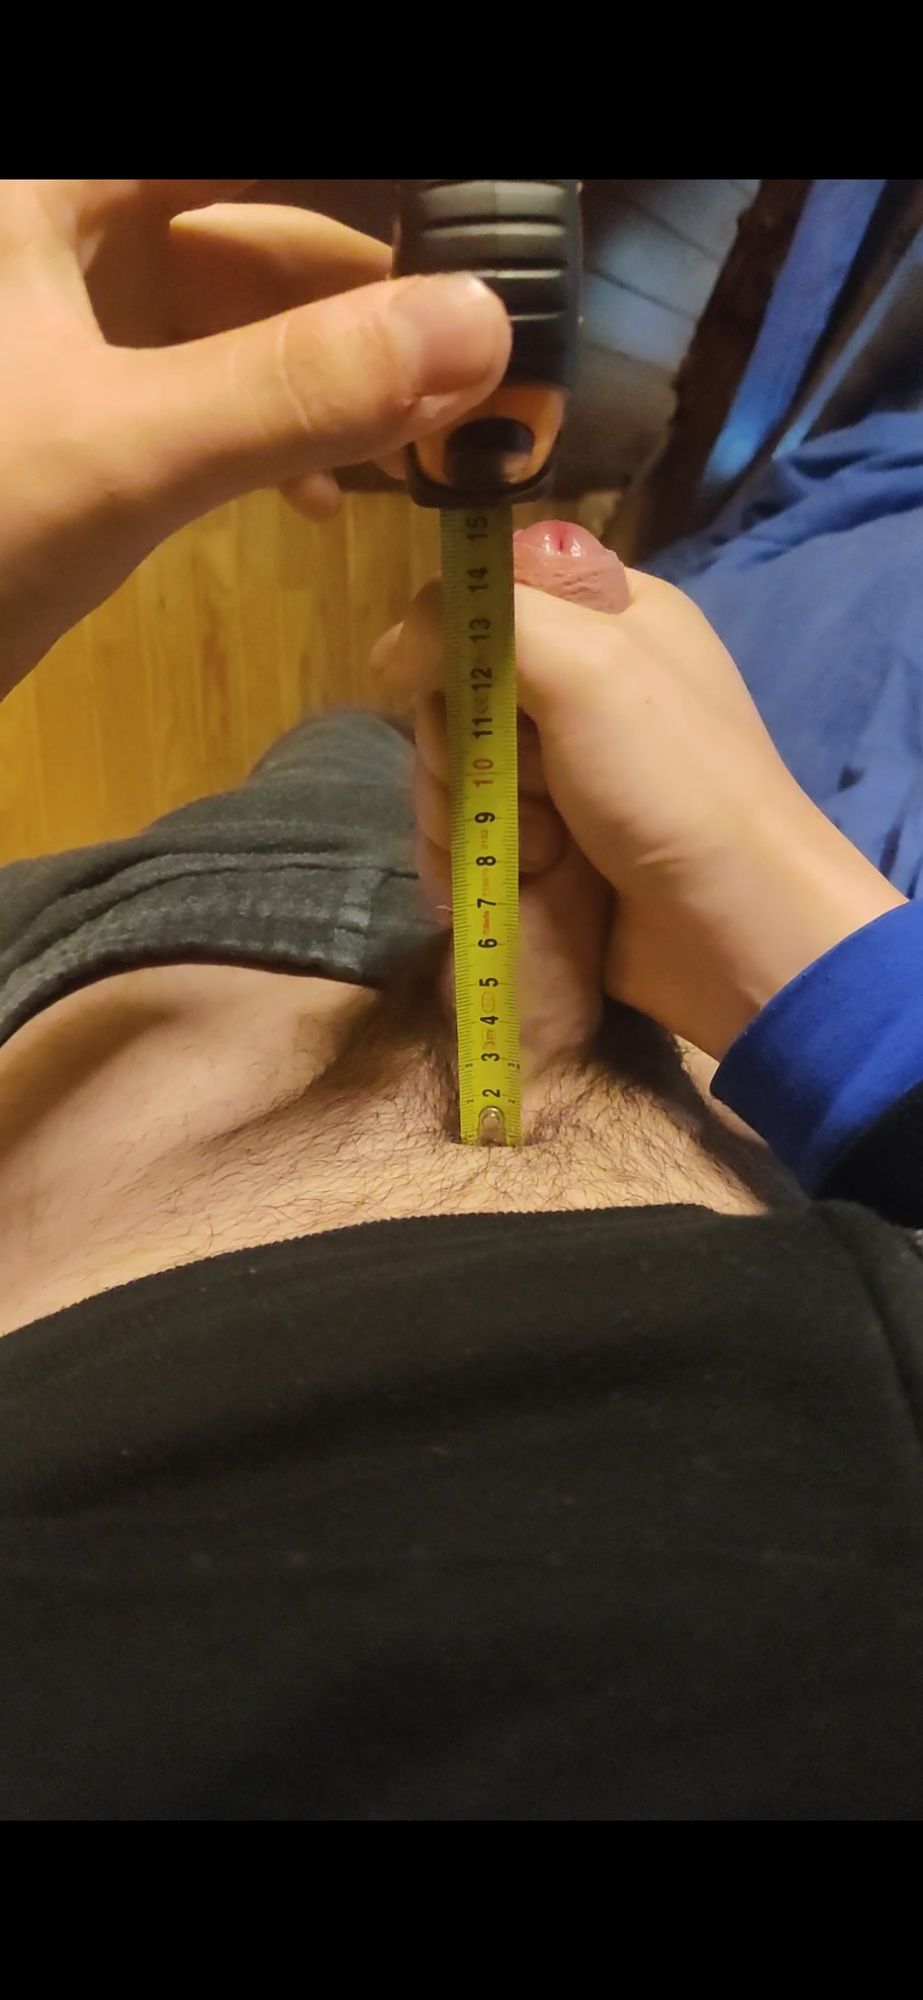 Tried to measure my cock (a little over 15cm max) #7